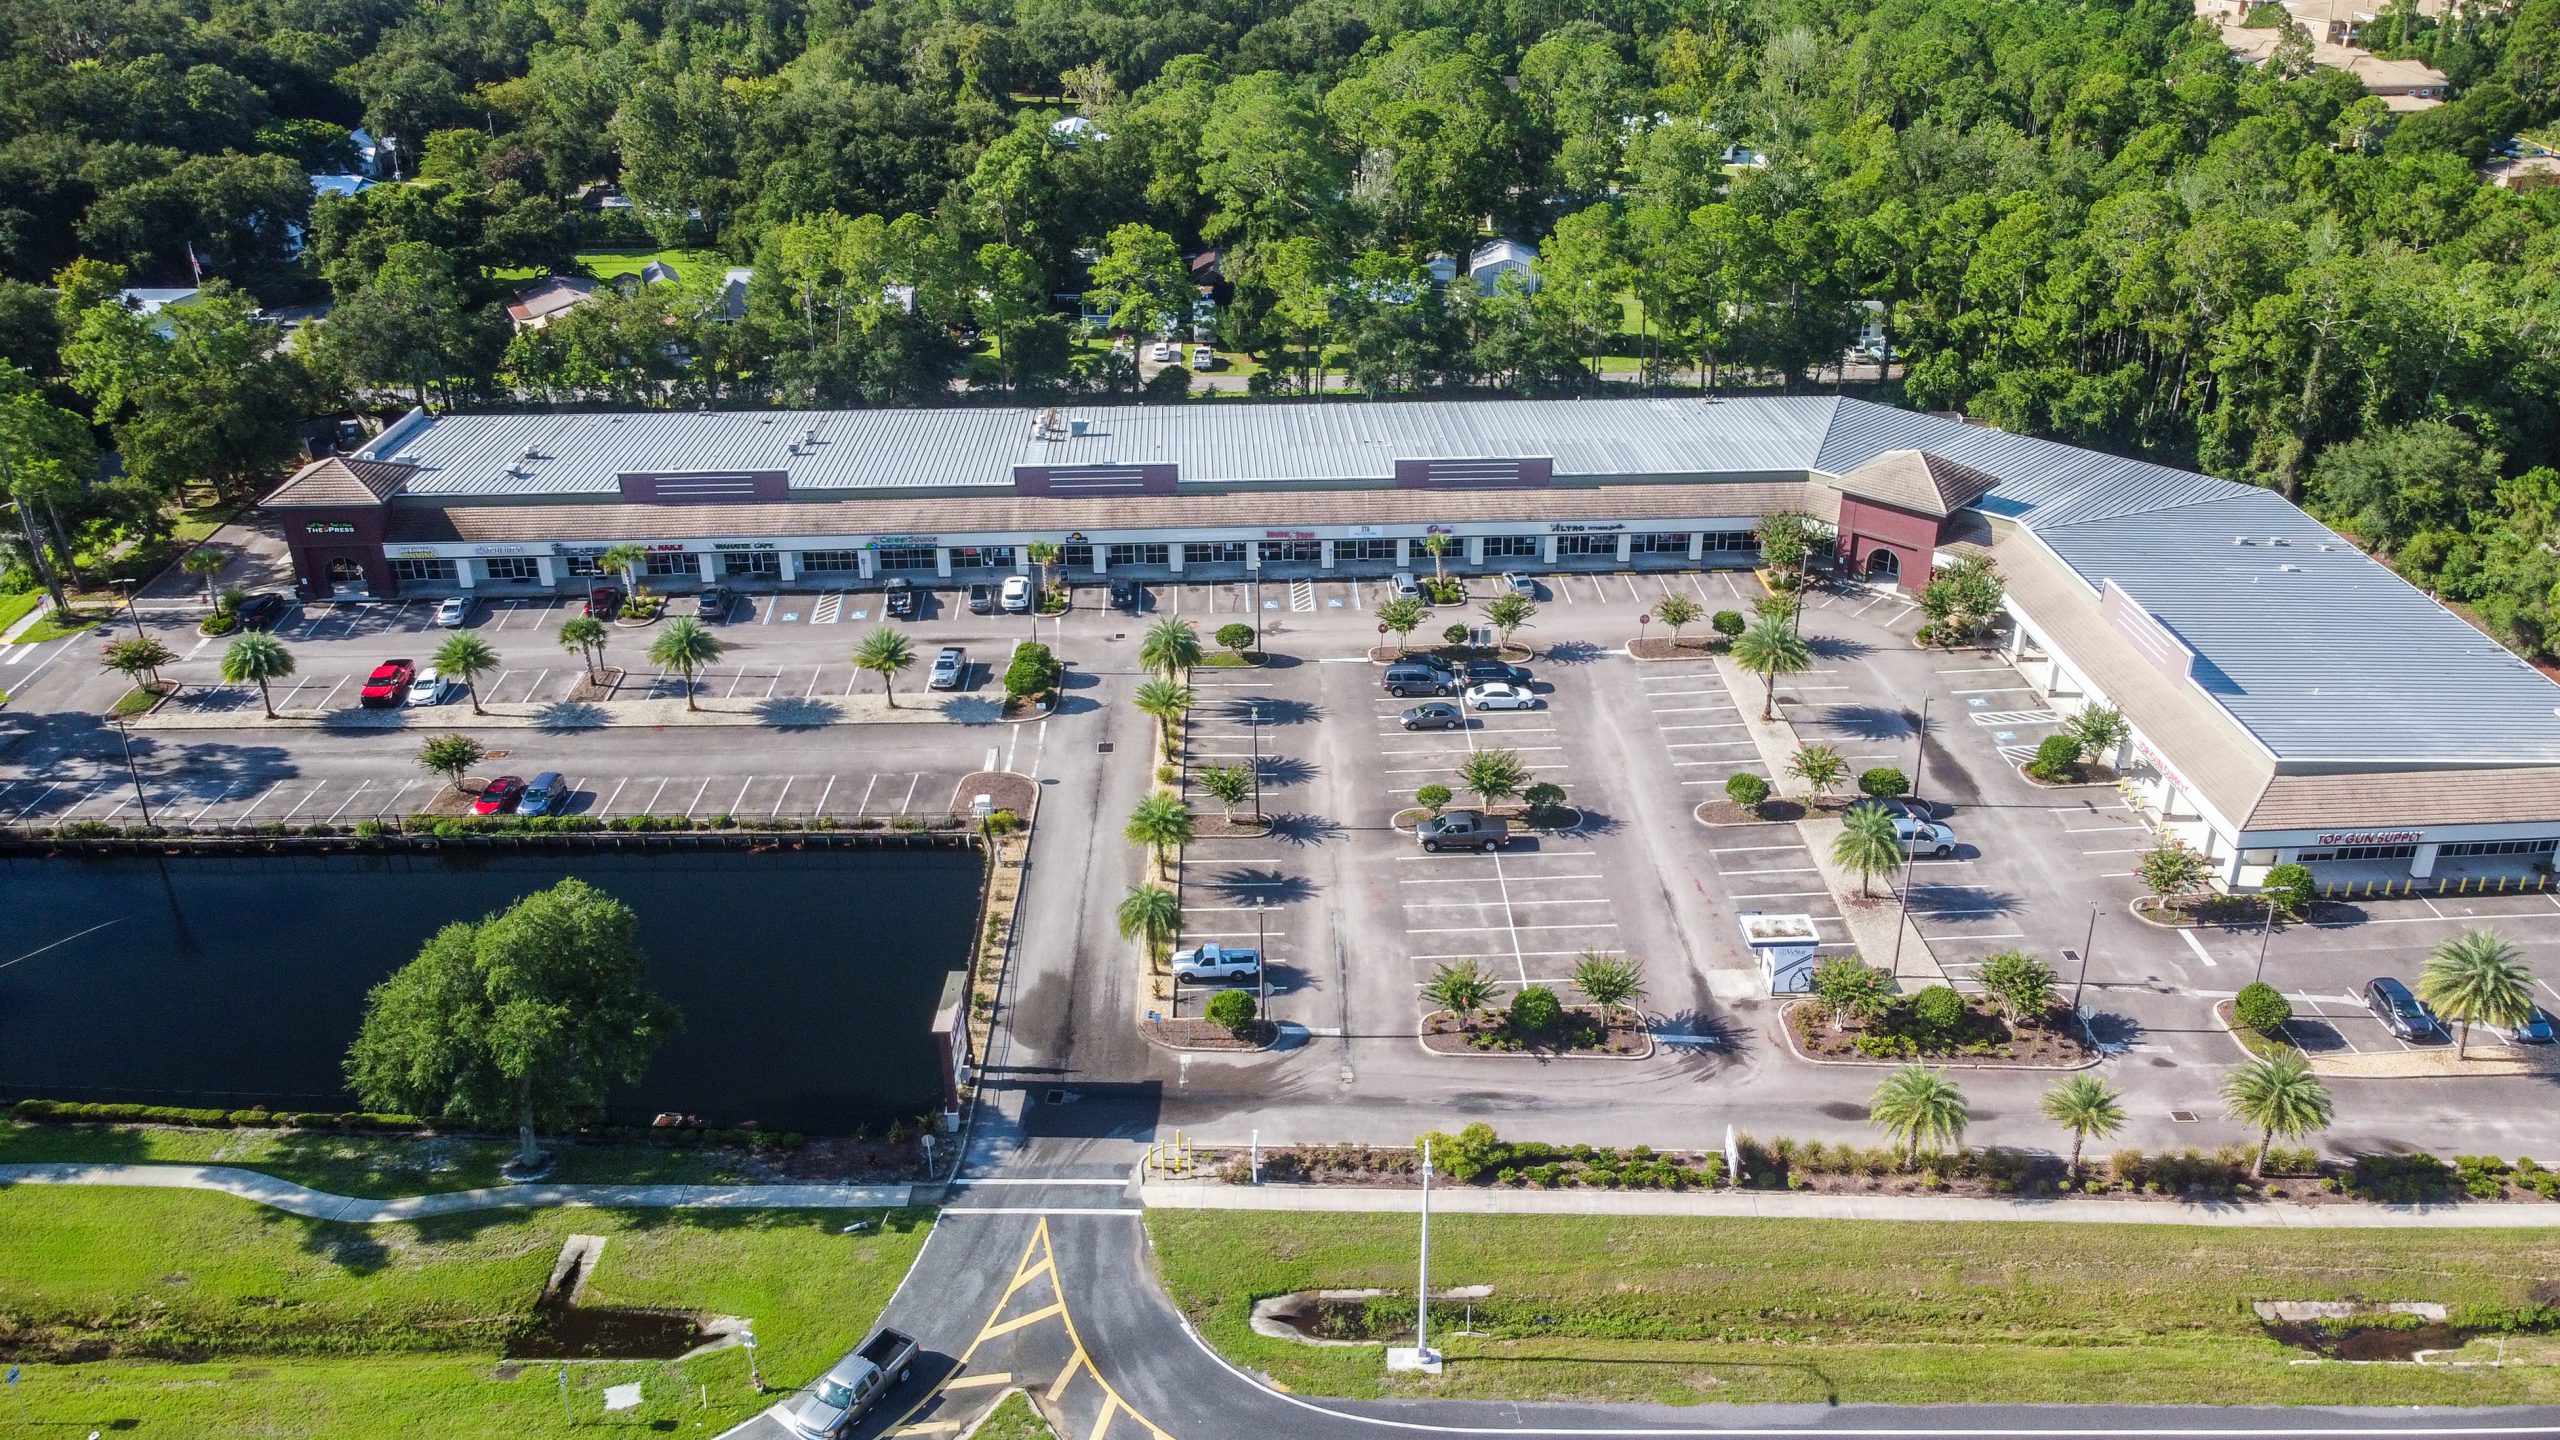 An aerial view of a retail center & parking lot.